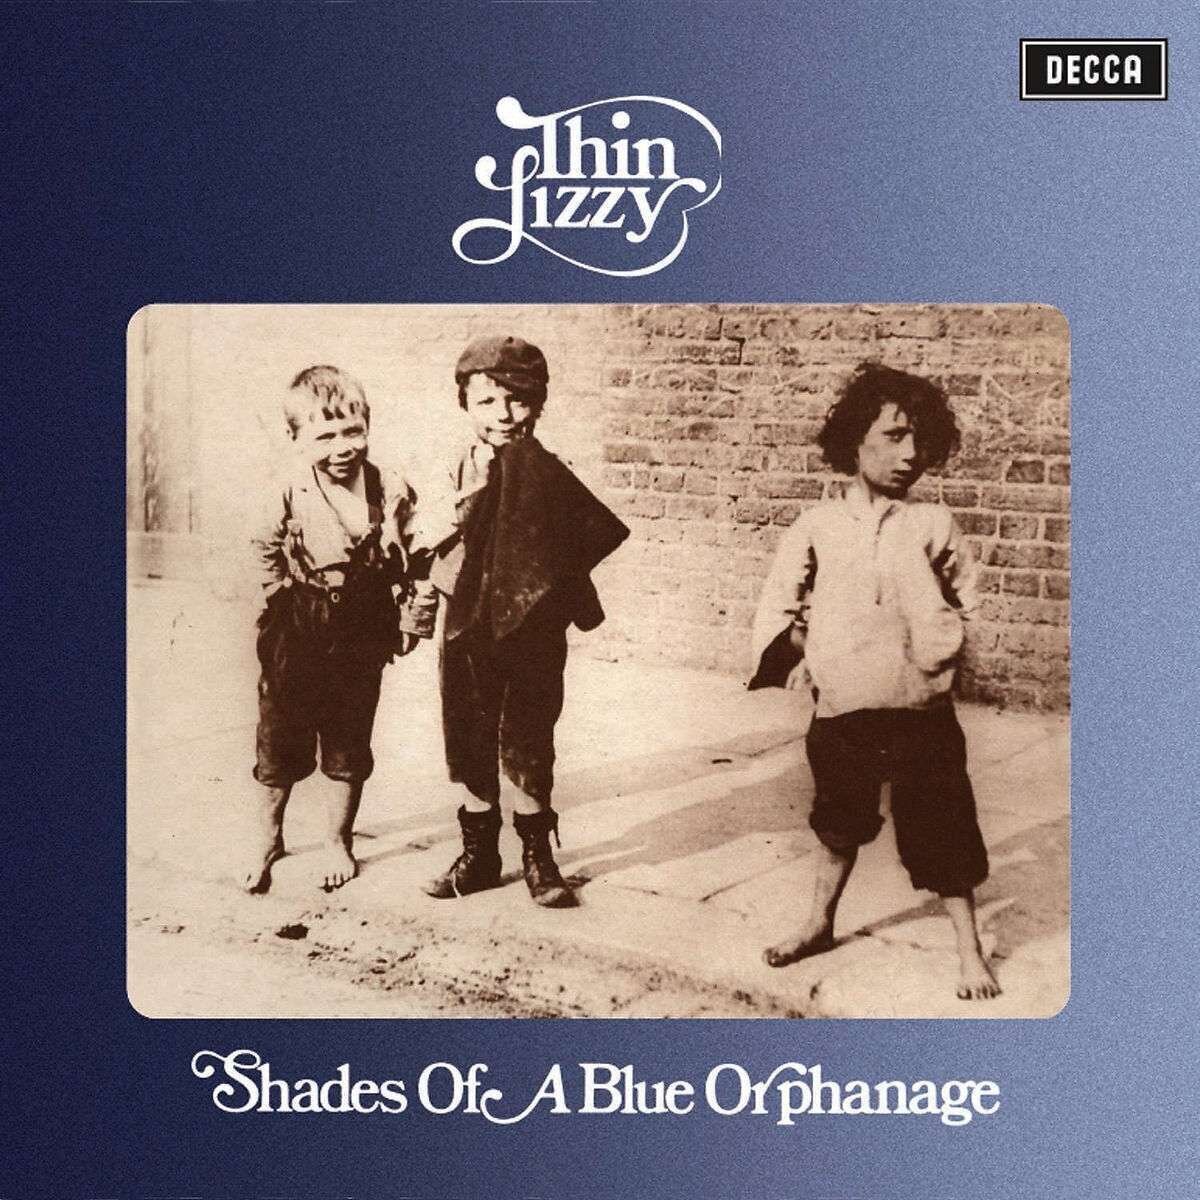 Musik-CD Thin Lizzy - Shades Of A Blue Orphanage (Reissue) (CD)